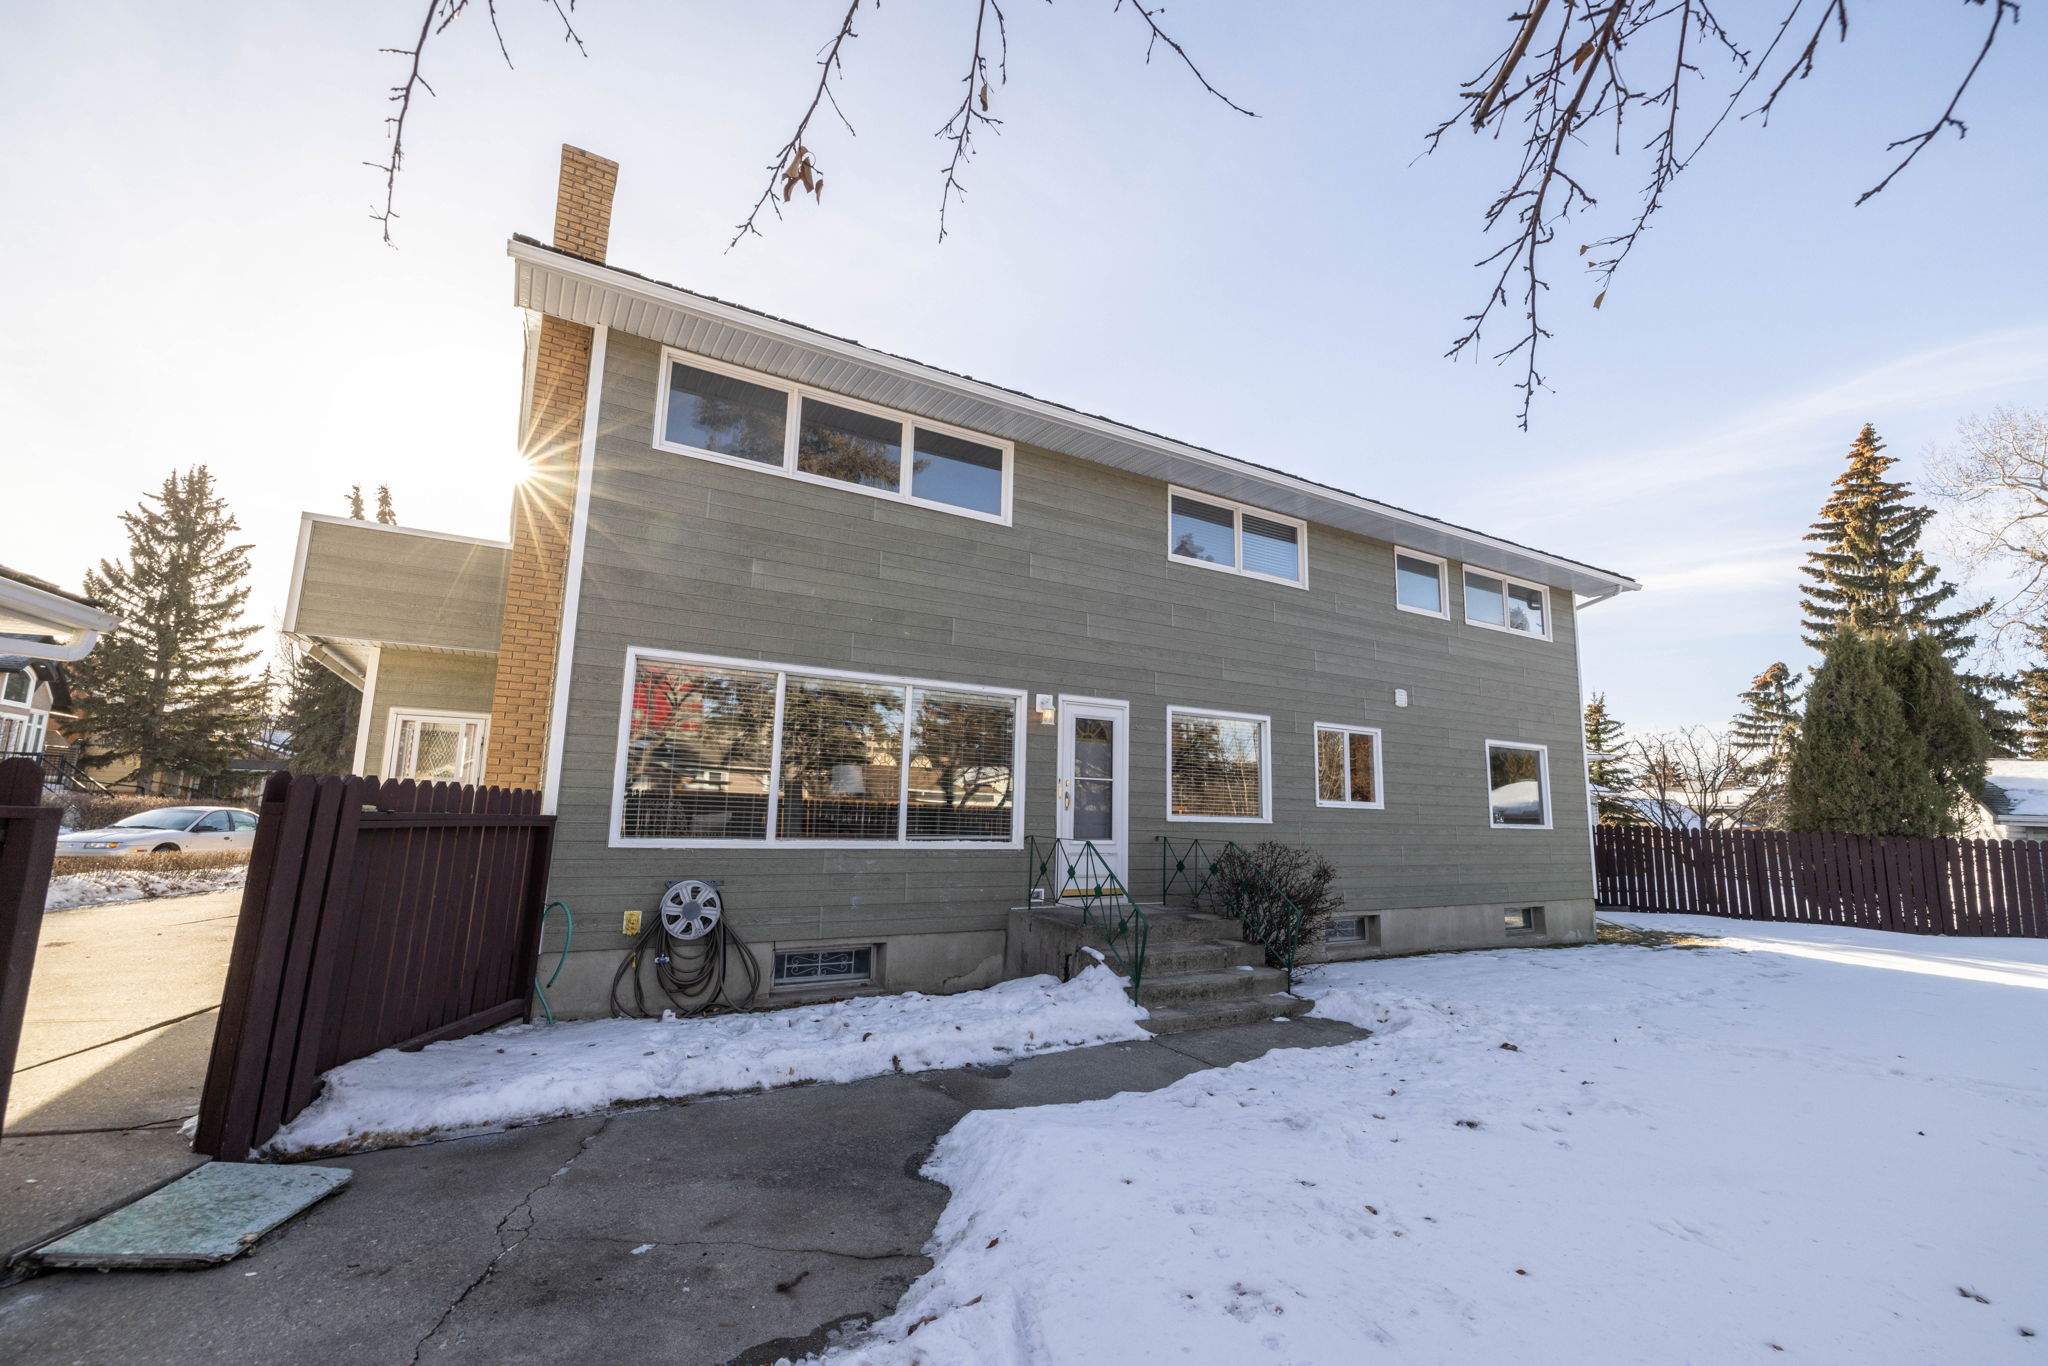 3224 Uplands Pl NW, Calgary, AB T2N 4H1, Canada Photo 78